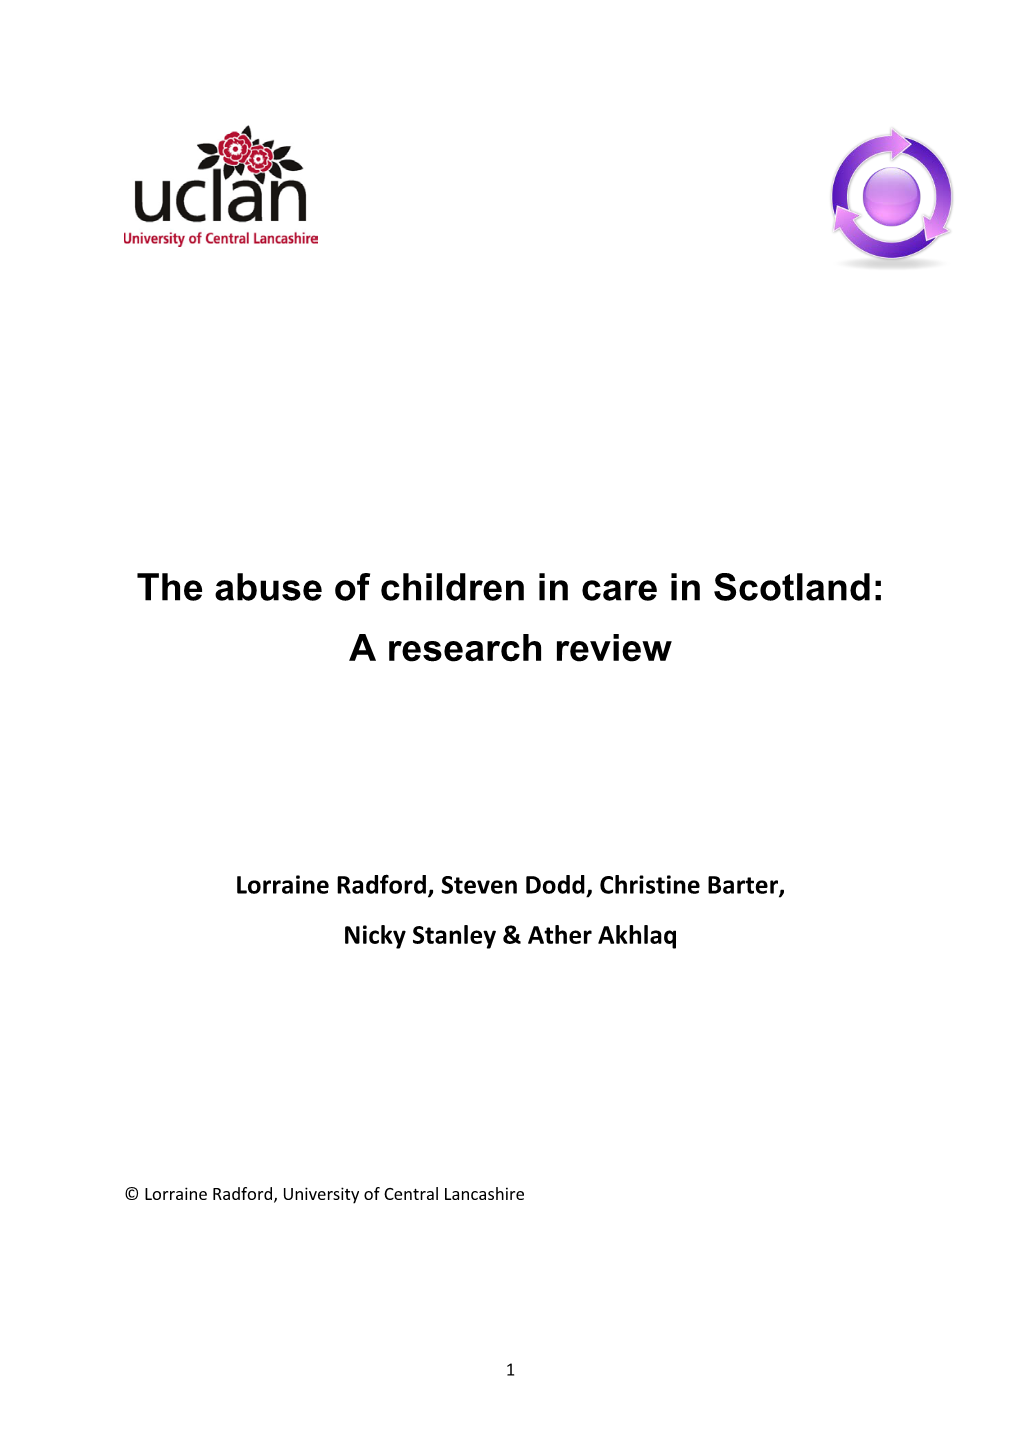 The Abuse of Children in Care in Scotland: a Research Review